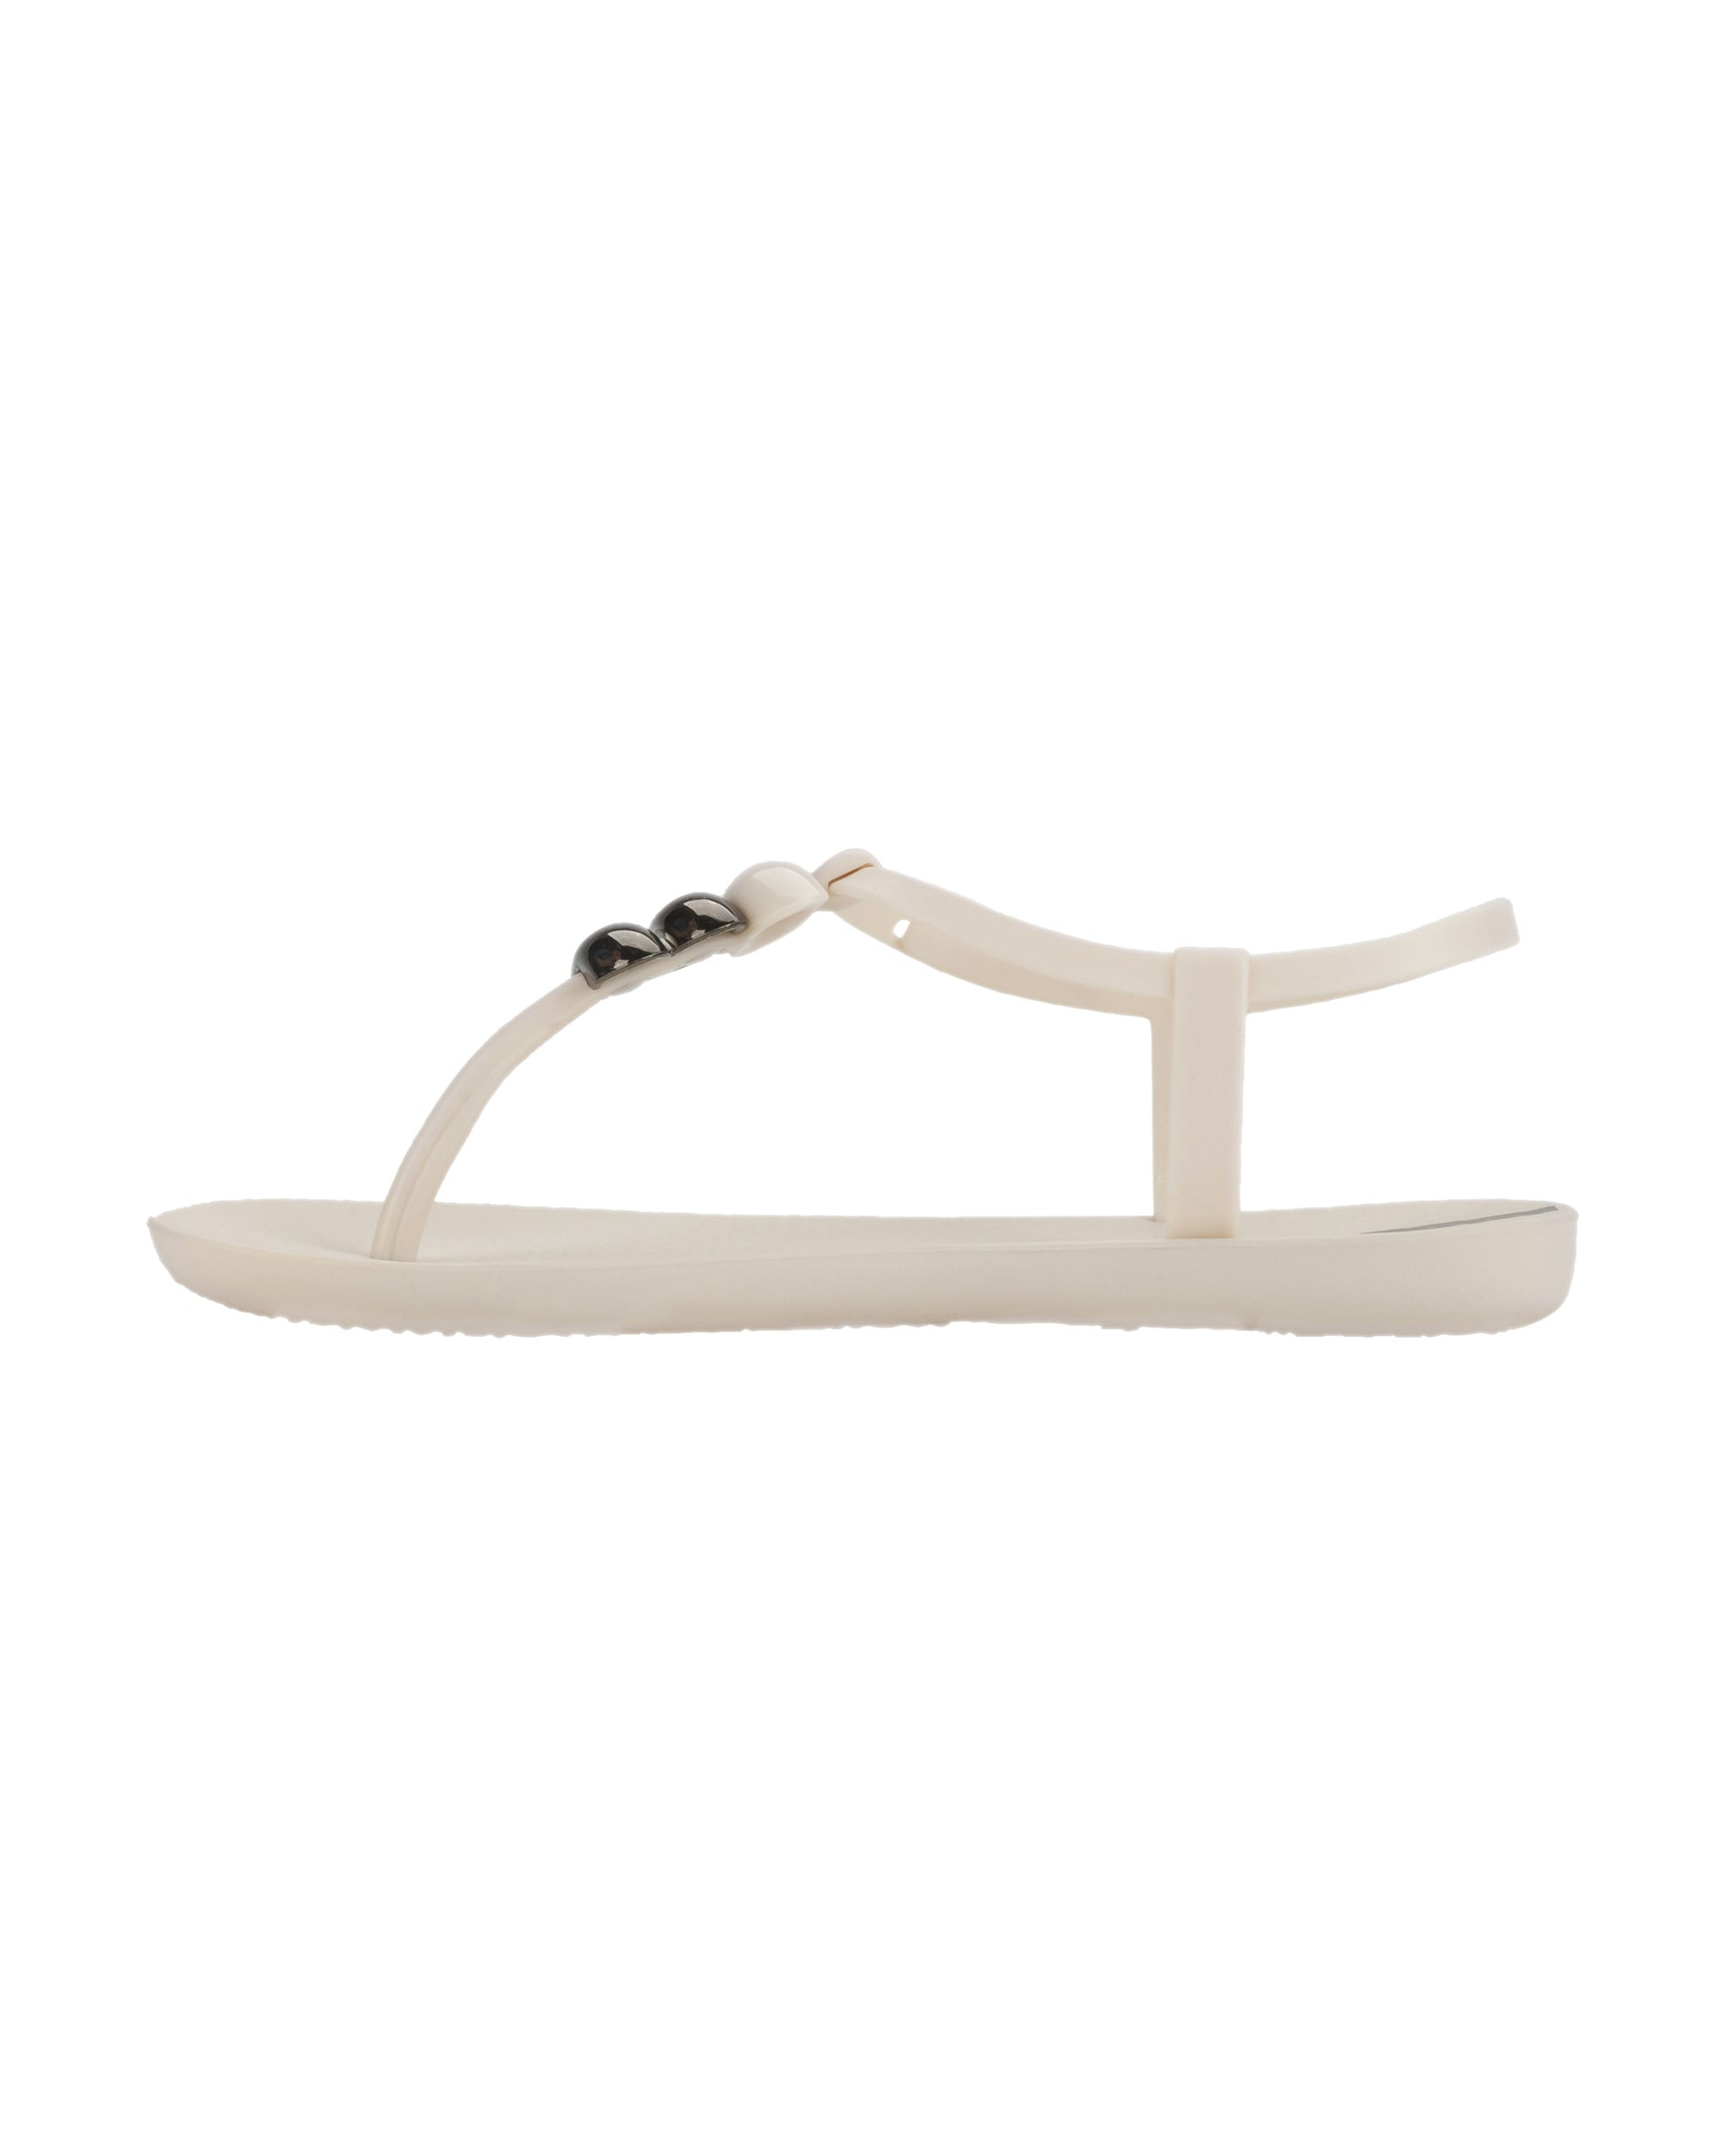 Inner side view of a beige Ipanema Class women's sandal with 3 bubble baubles on the t-strap.